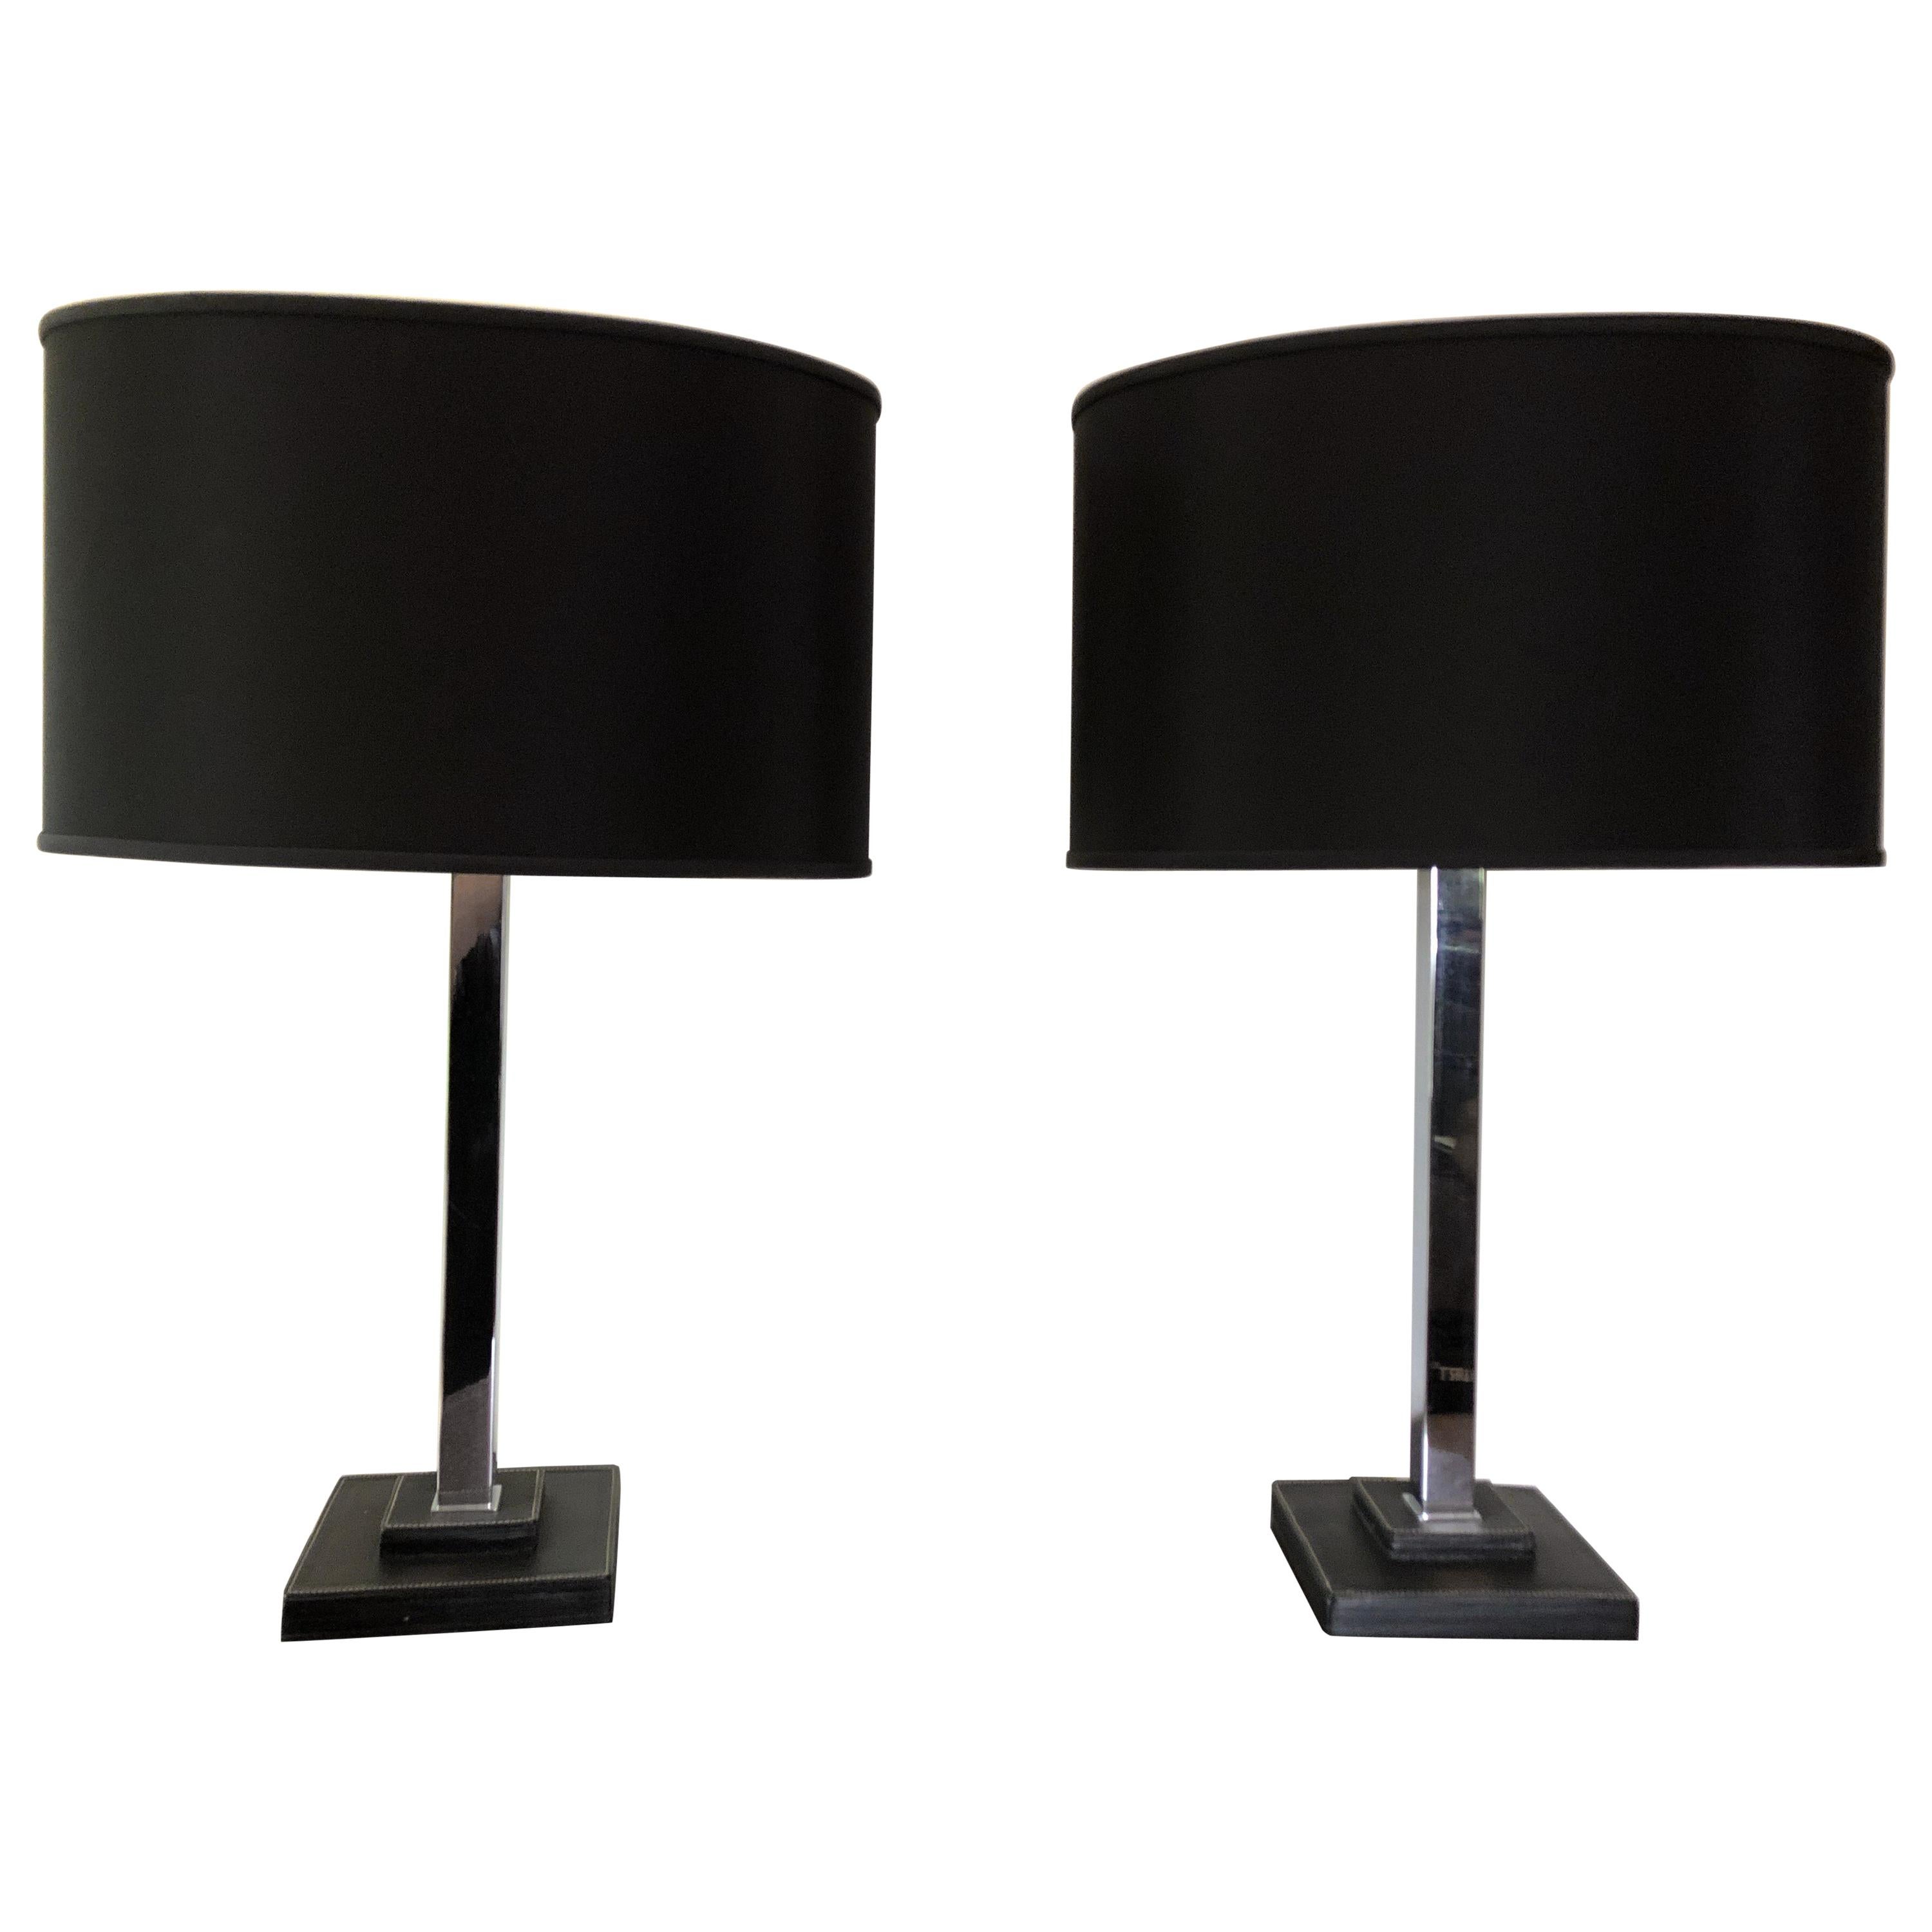 Pair of Chrome and Stitched Leather Table Lamps by Nessen